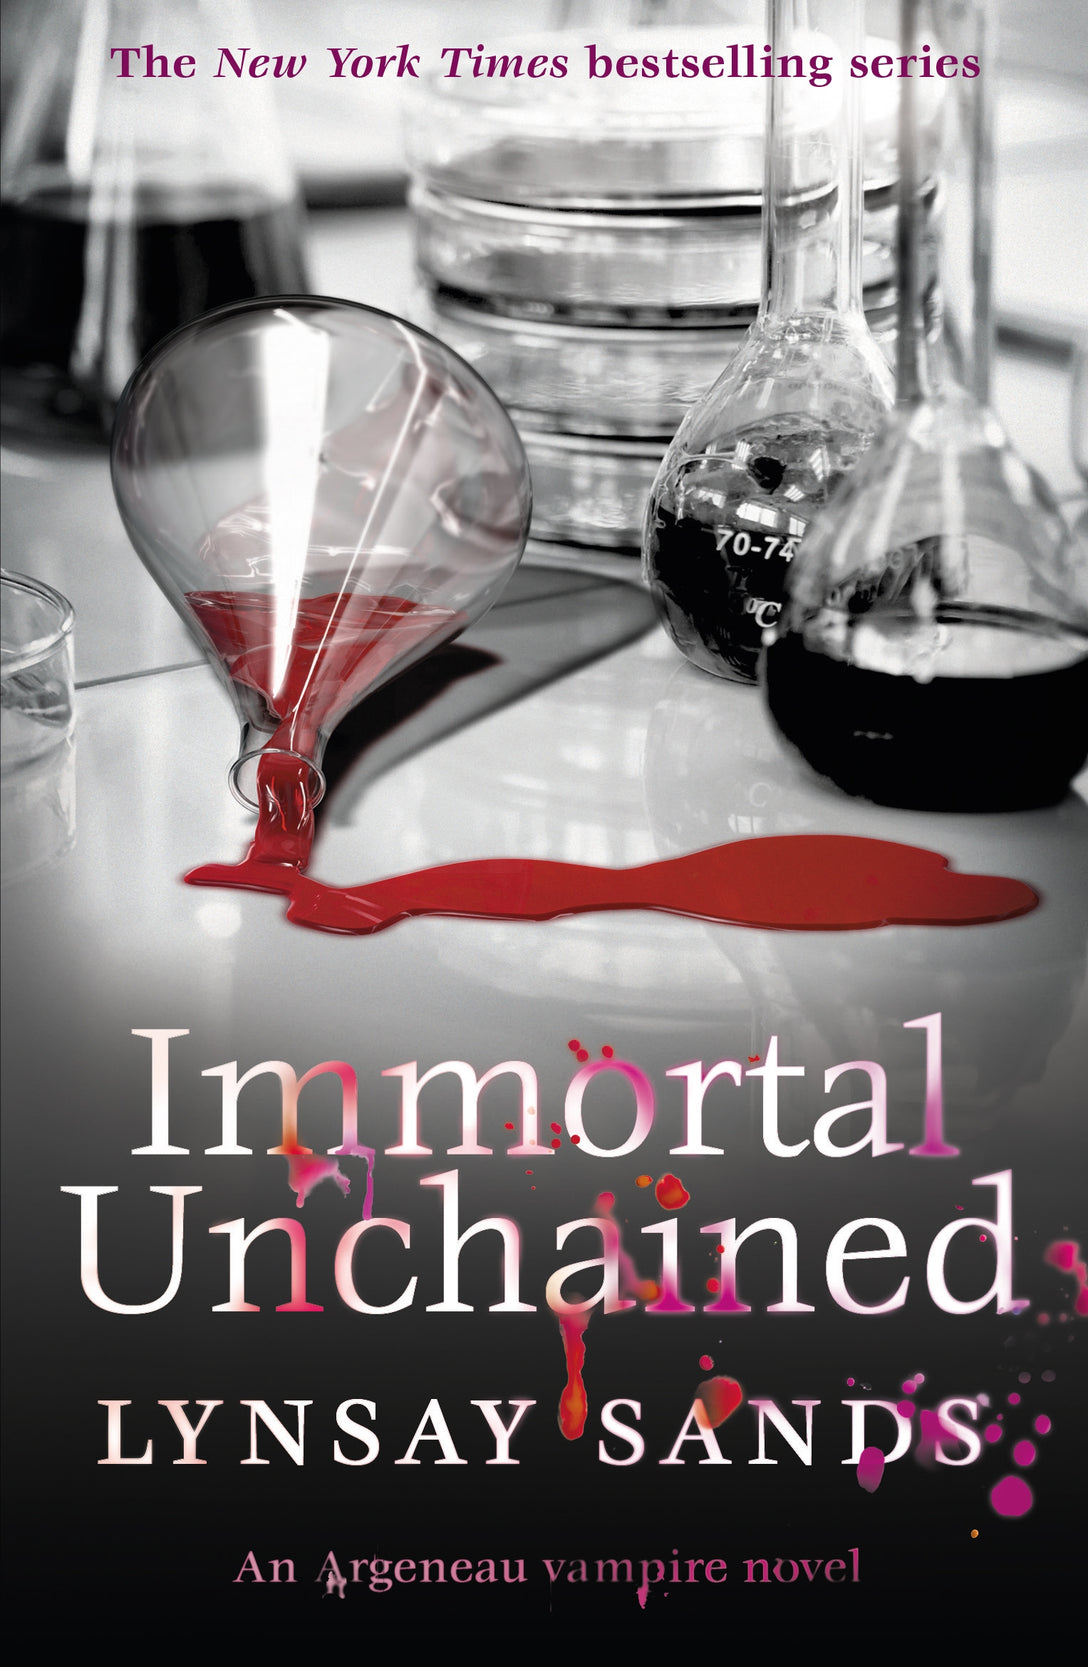 Immortal Unchained by Lynsay Sands